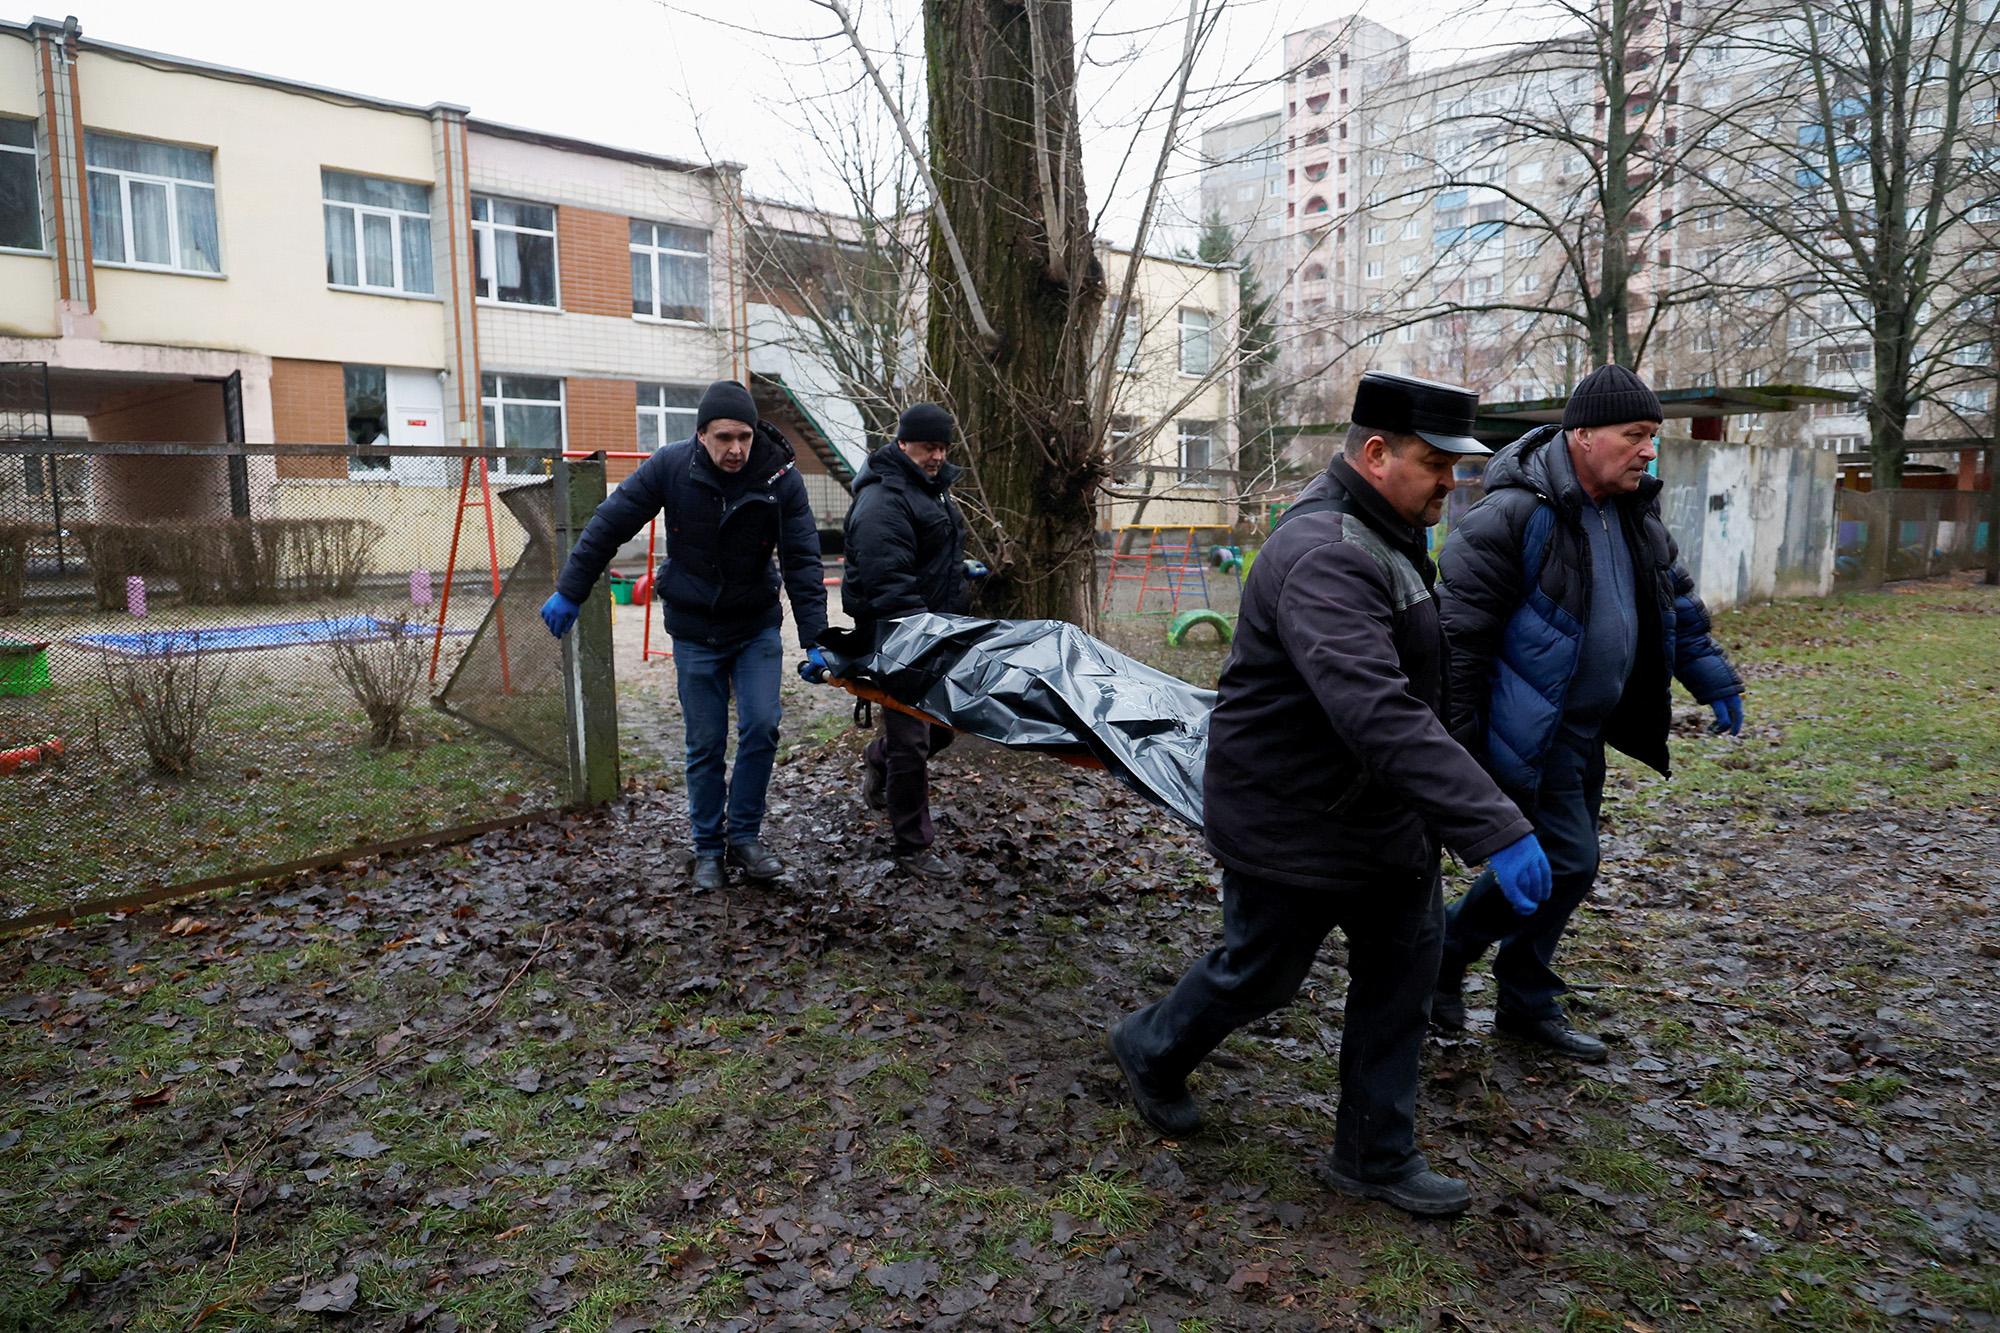 Bodies of victims at the site of the Brovary helicopter crash, are removed from the site on January 18.